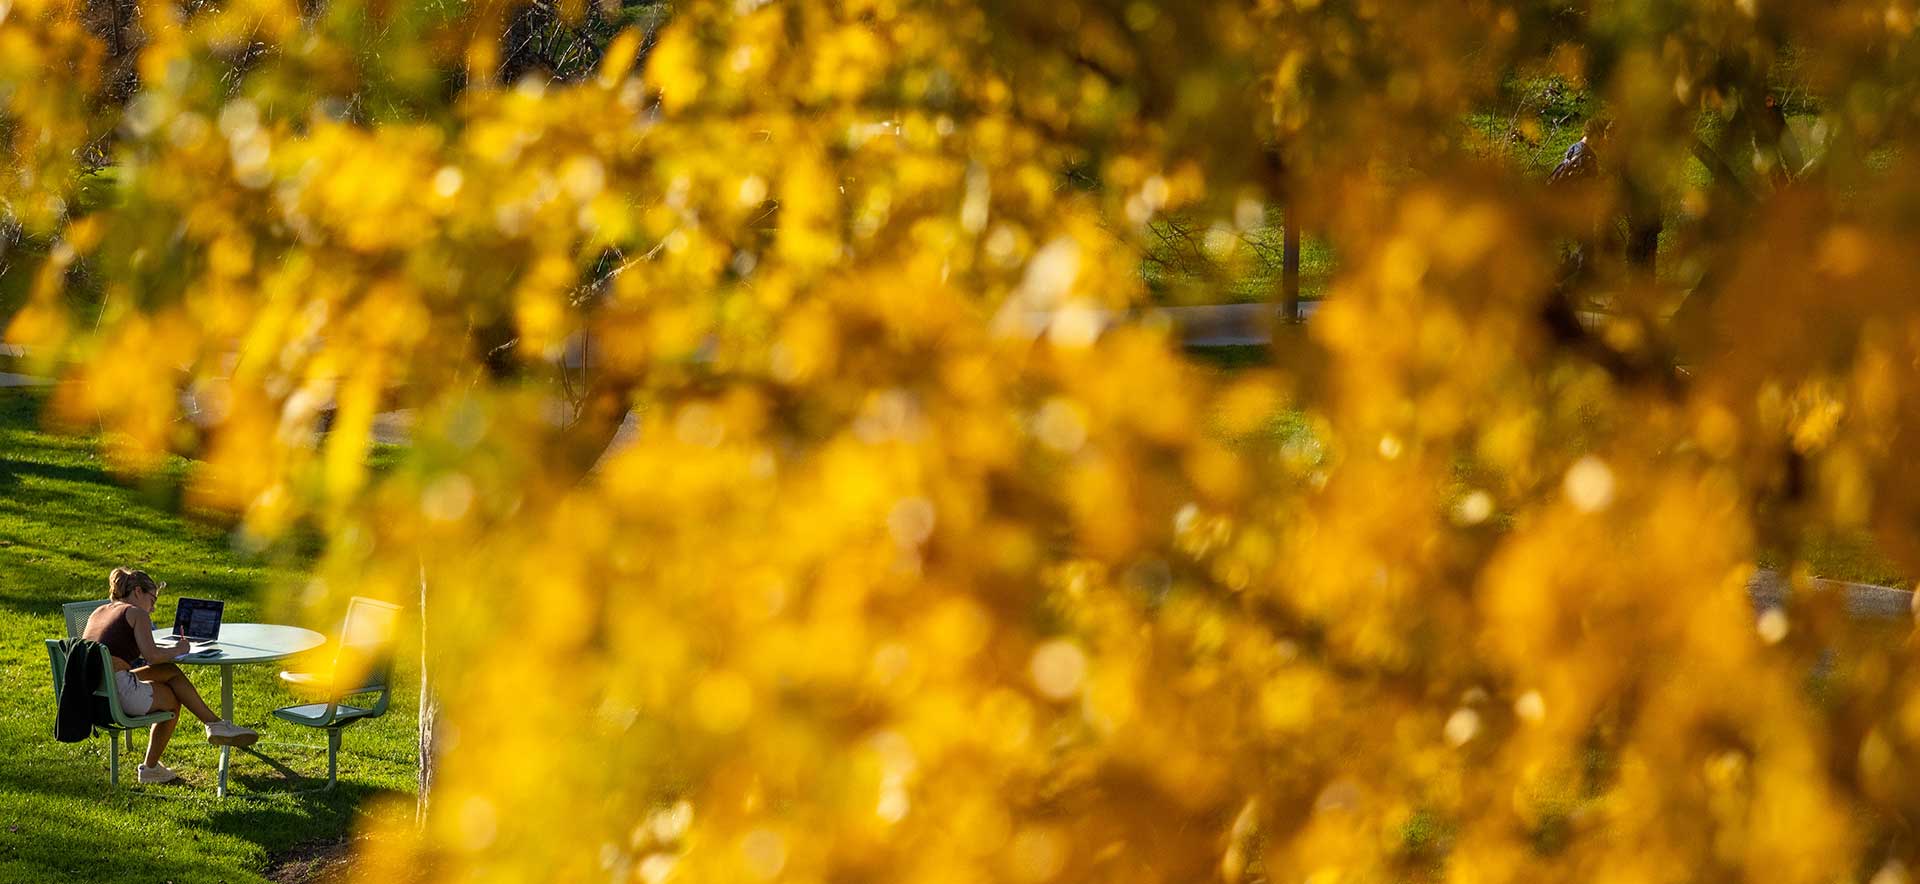 A student sits at a table outside, photo taken through the leaves of a yellow tree